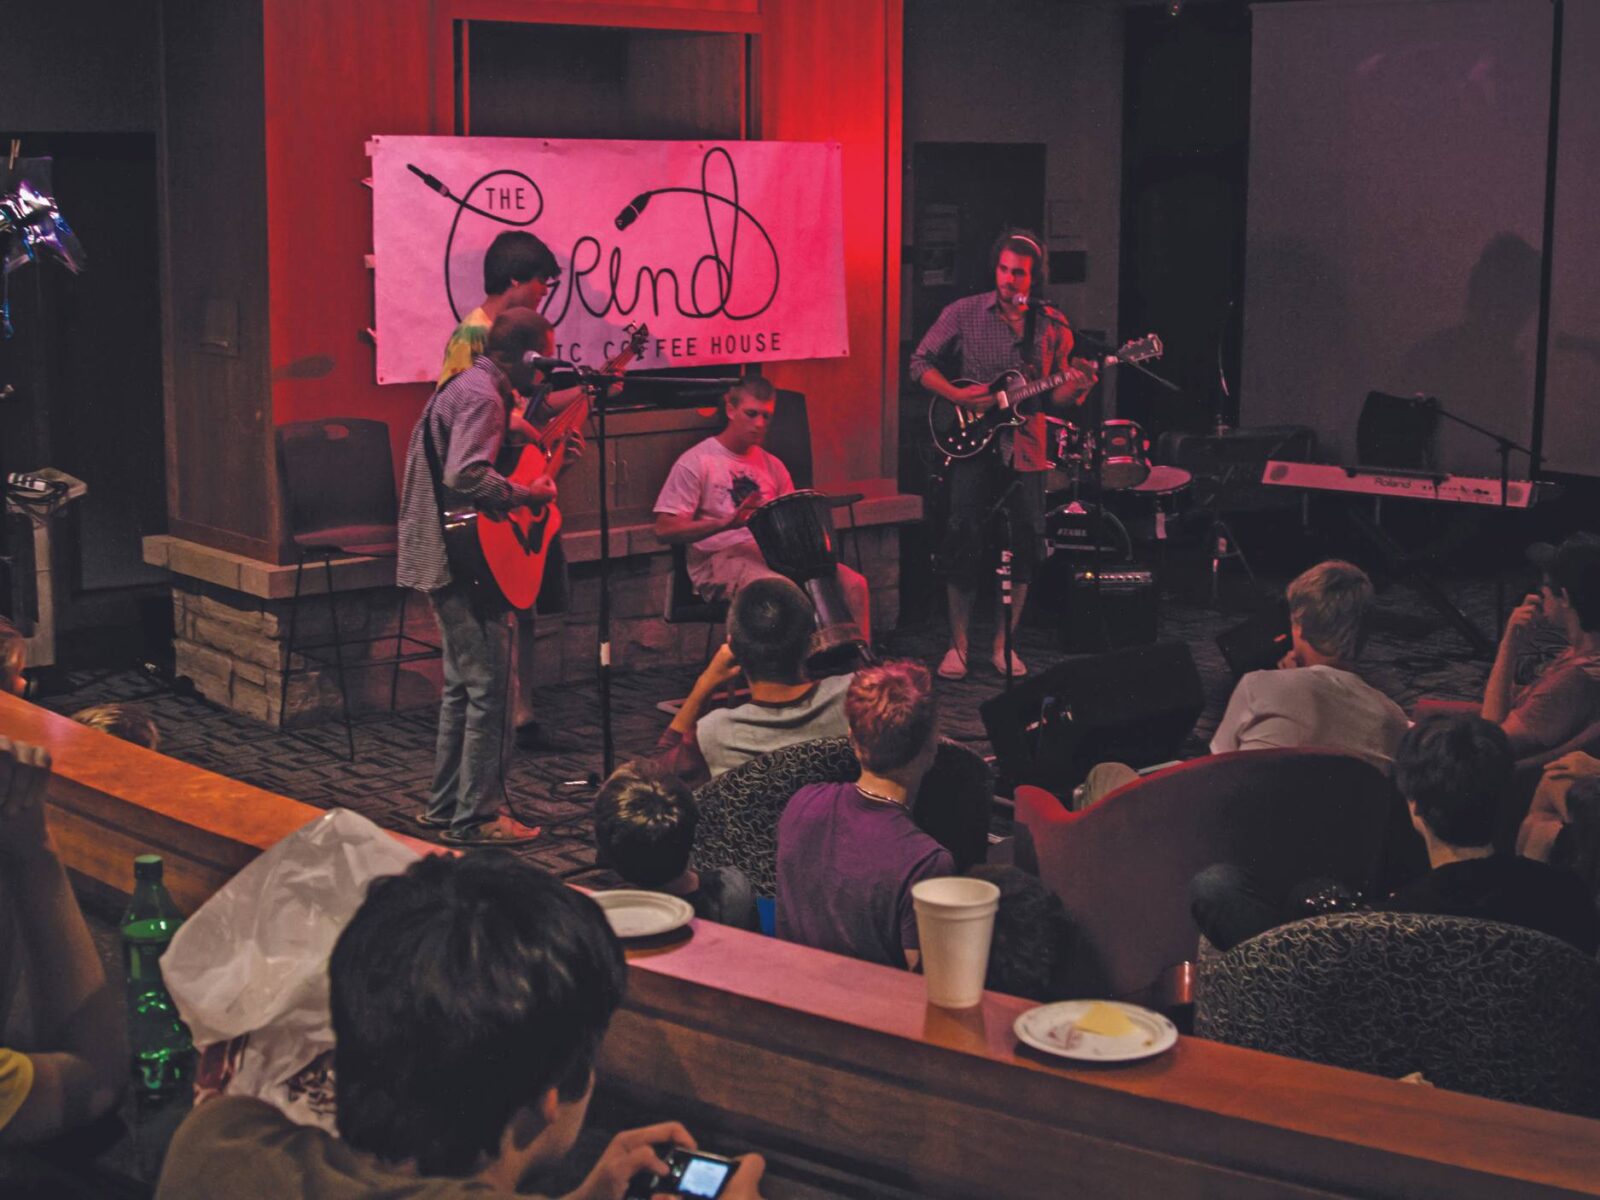 Students in fireside lounge preforming during The Grind with a red hue of light